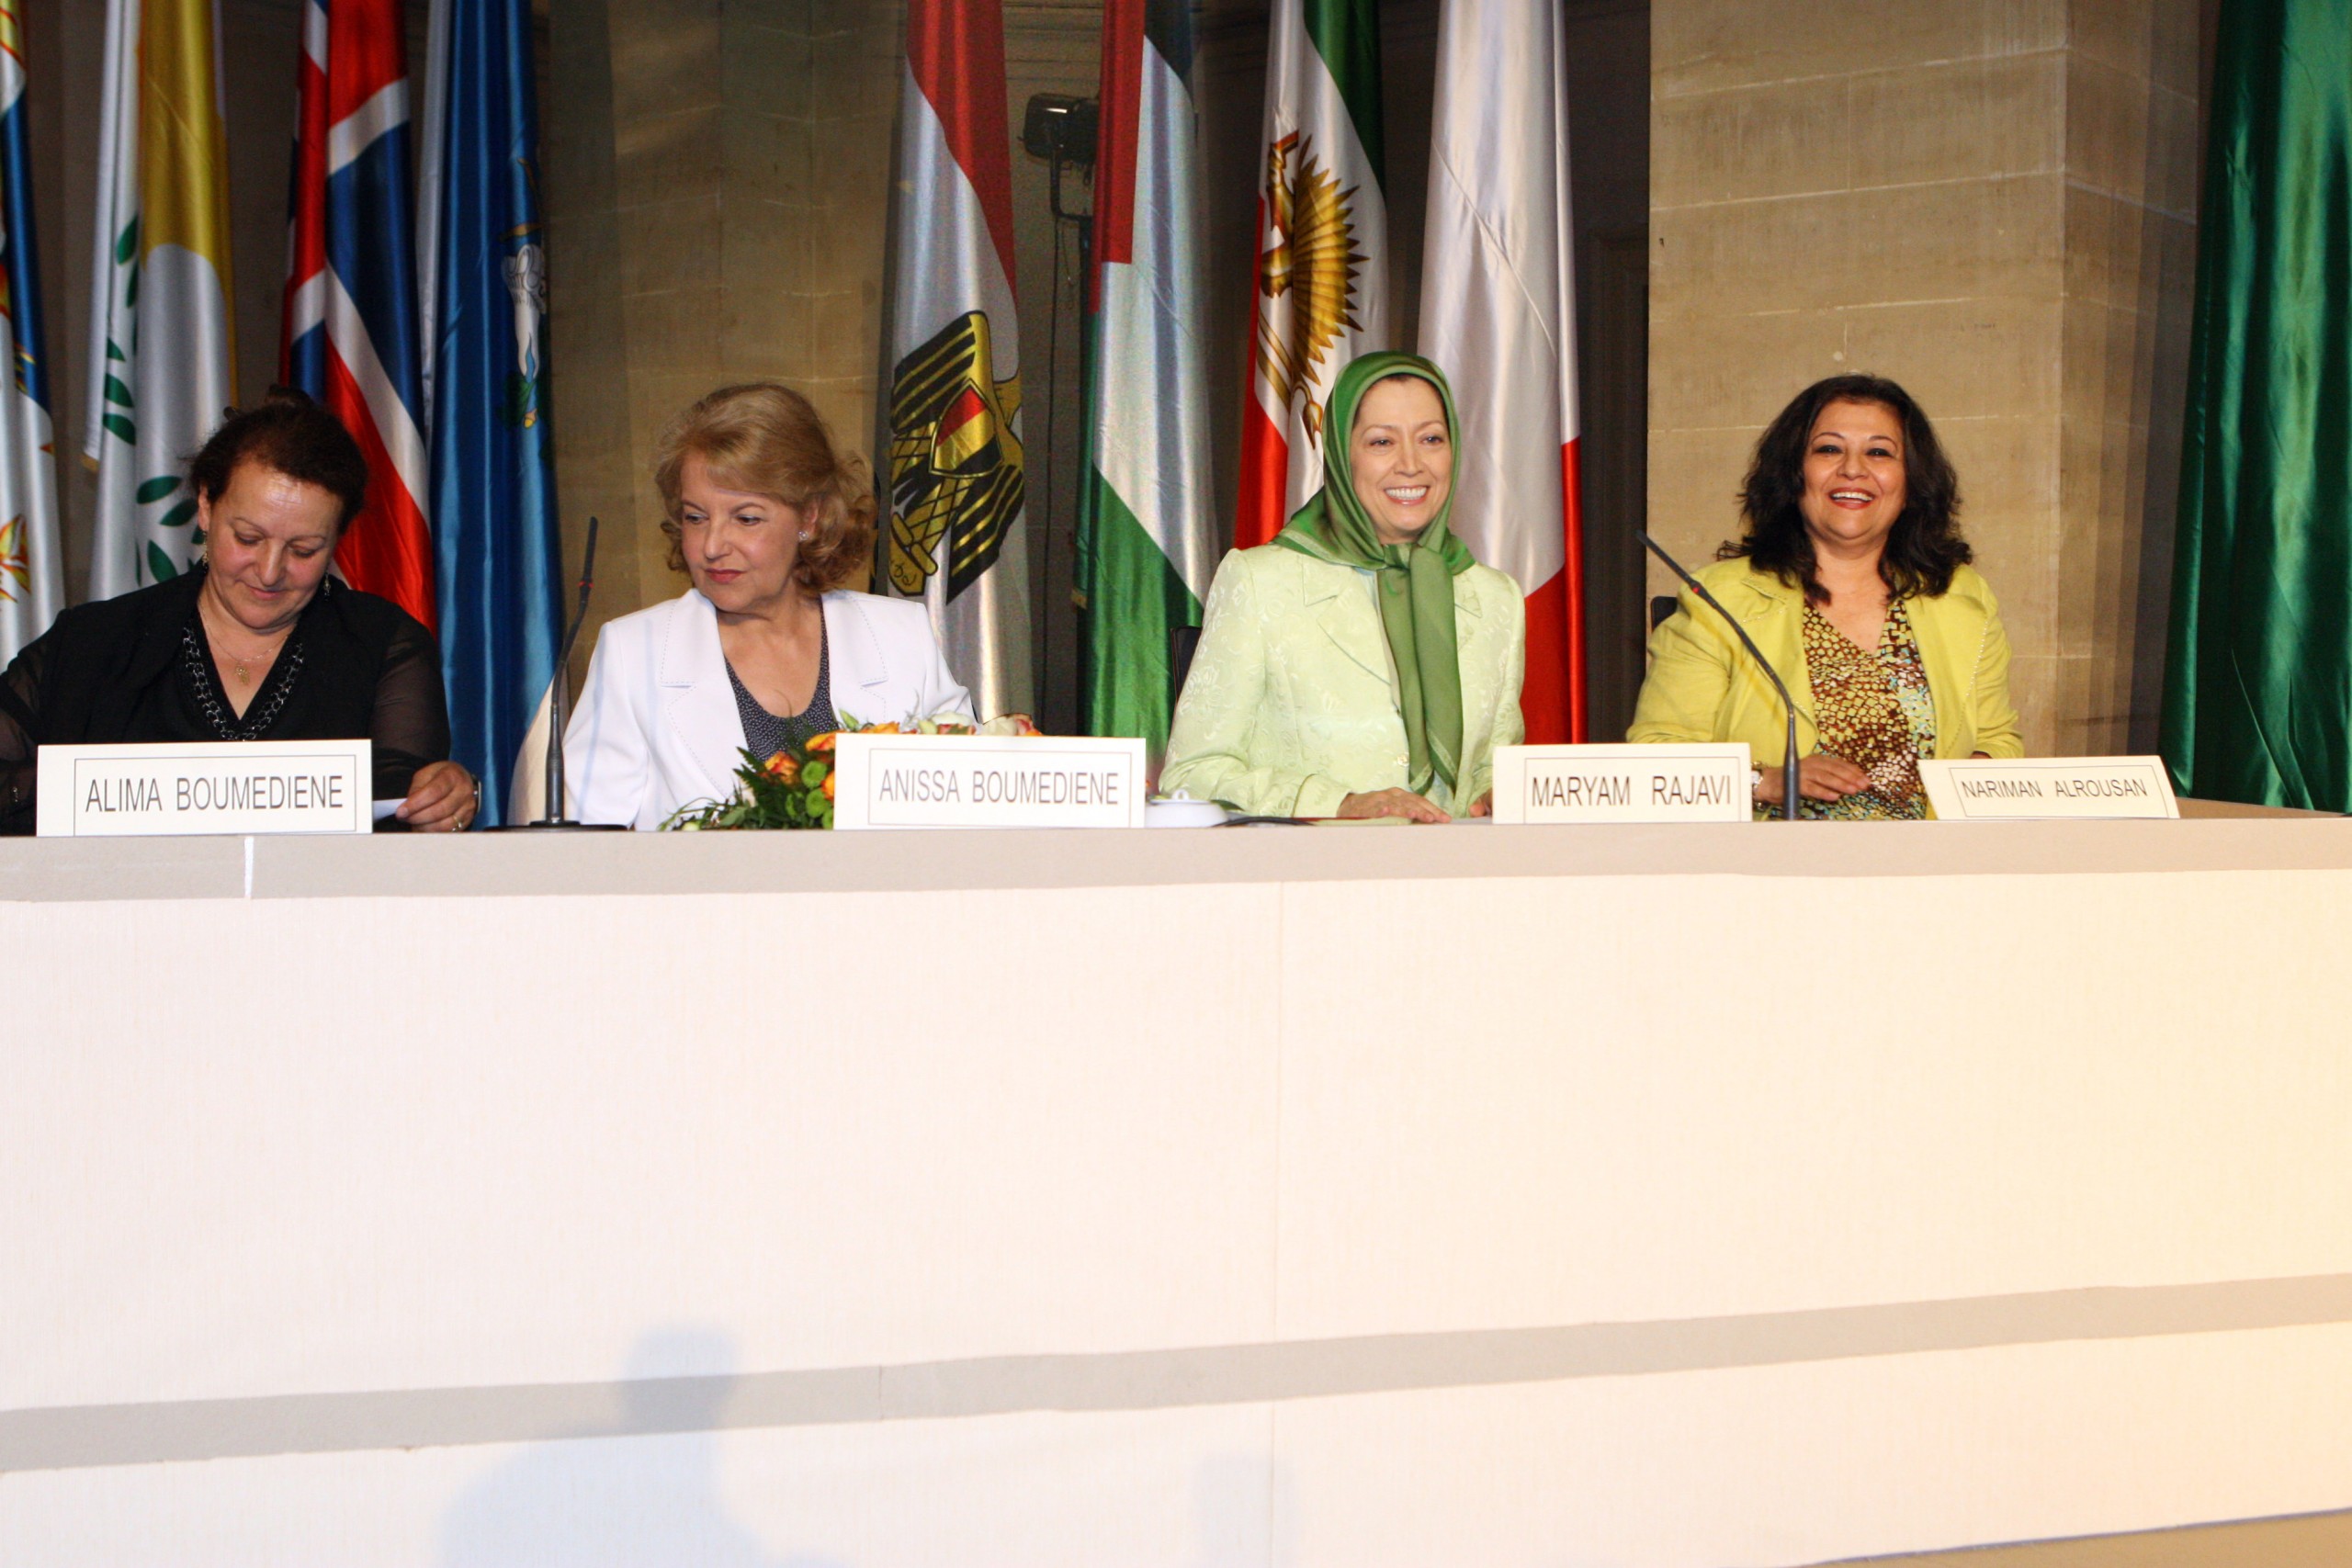 Maryam Rajavi: Genuine Islam only blossoms in the absence of discrimination and compulsion